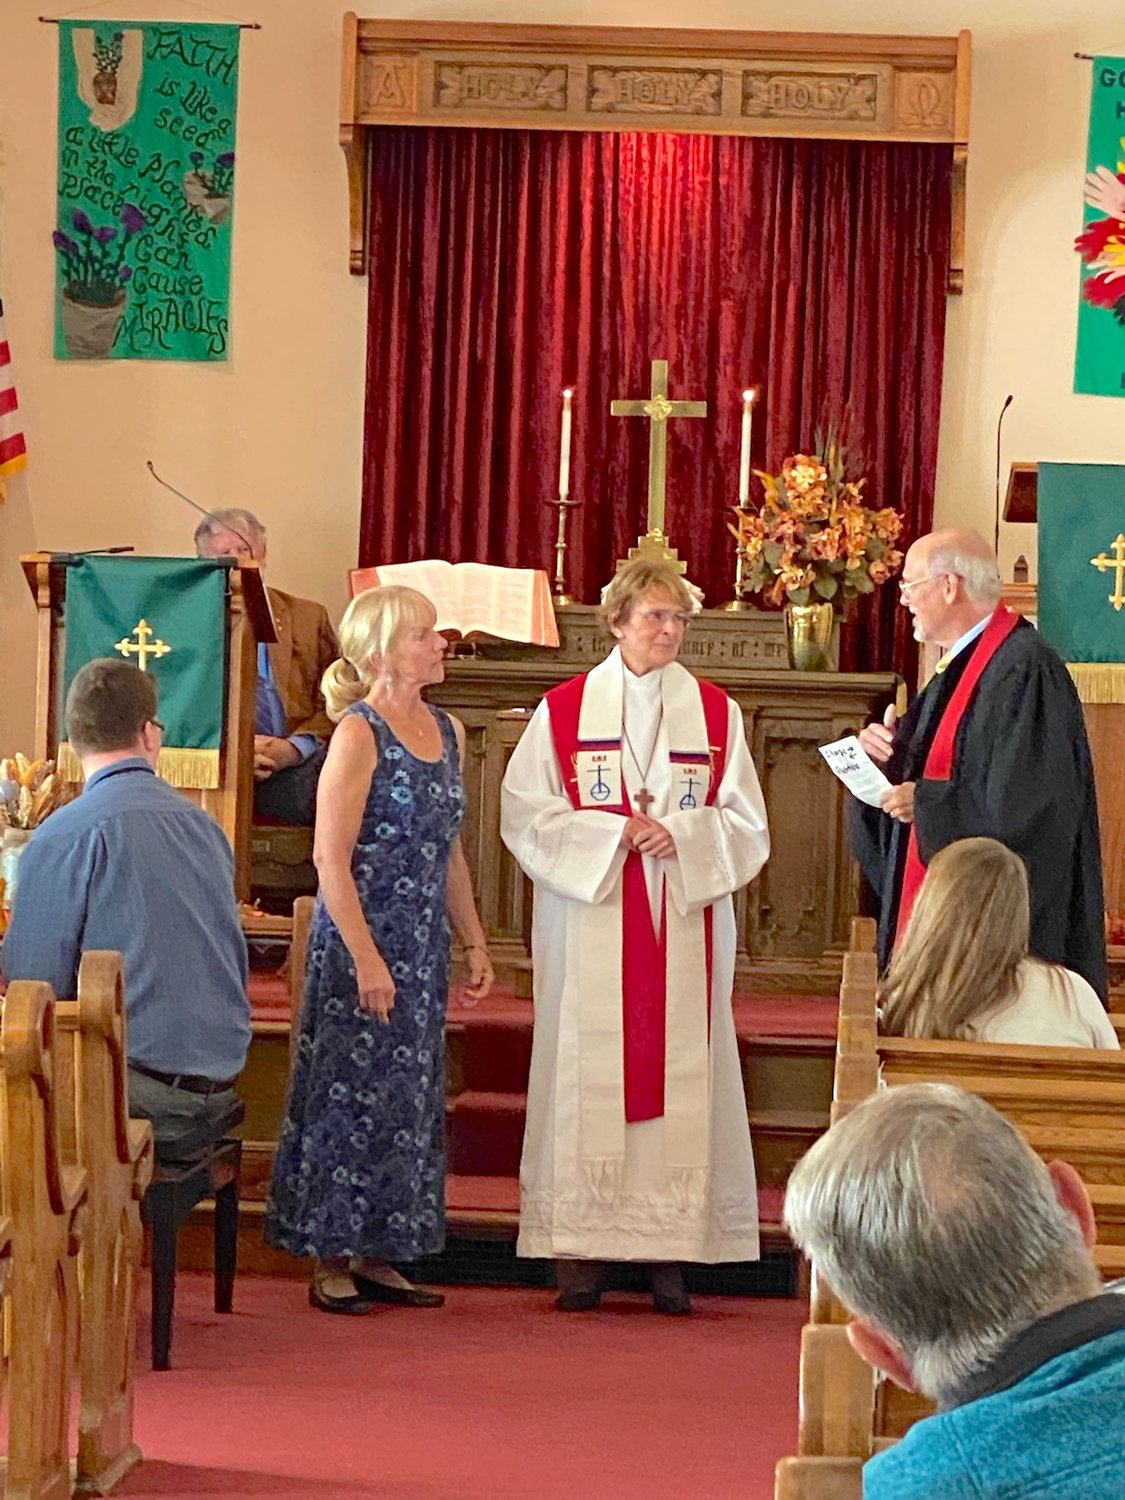 From left, Aaron Browka, director of music at Trinity Church; Rev. Frank Graichen, retired pastor at Trinity (back); Kathy wood, president of the church council; Pastor Karen Marshall; and Rev. Jim Martinez